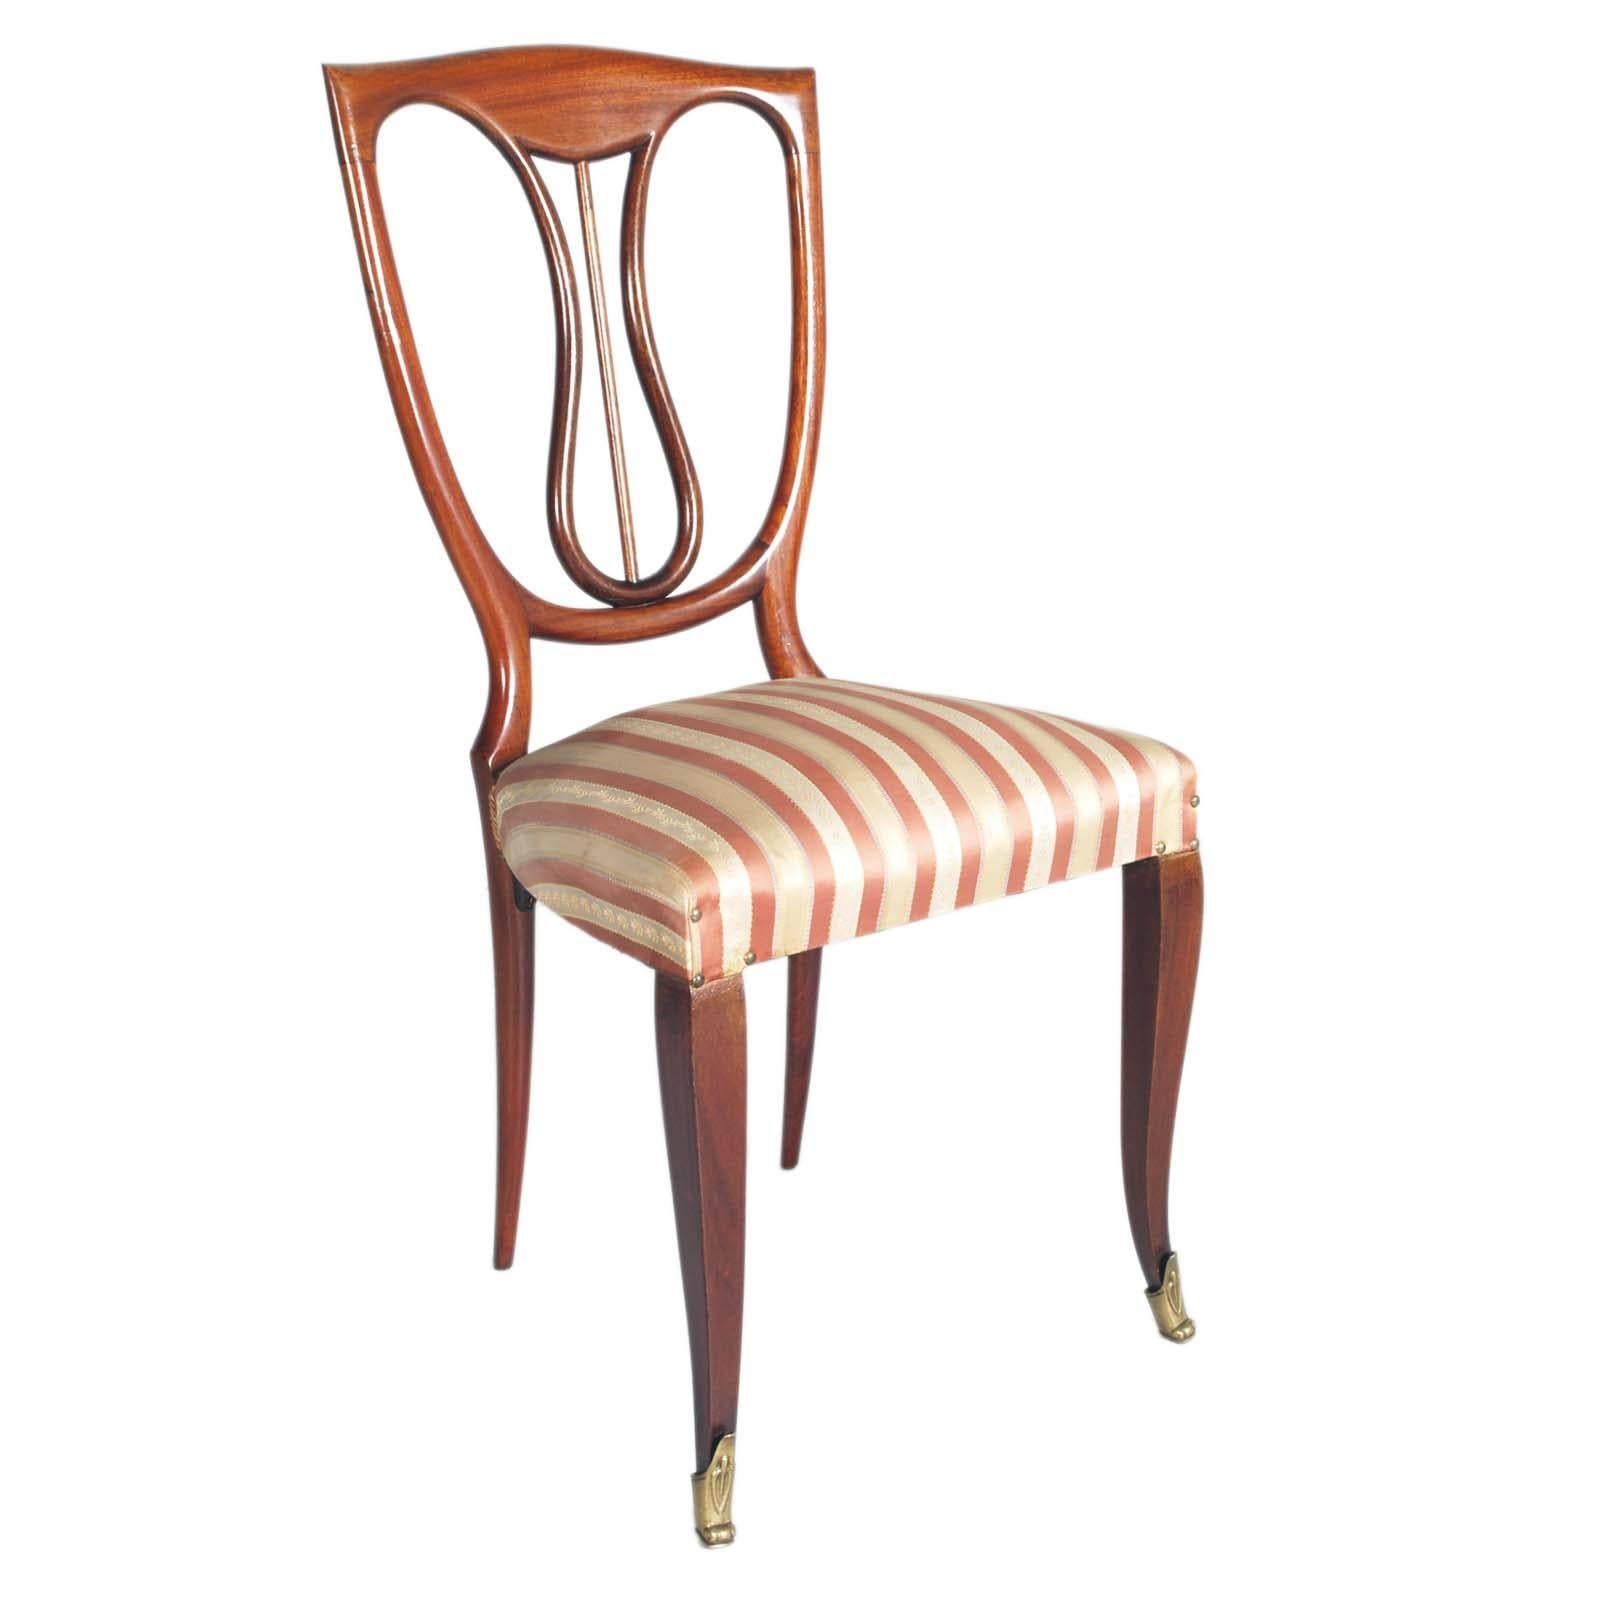 Elegant pair 1940s side hall chairs in mahogany laquered, Melchiorre Bega attributed, with springs seat; neoclassical stylized LIRA backrest. Feet in embossed gilded brass. 
Chairs of great image in the neoclassical style interpreted in the